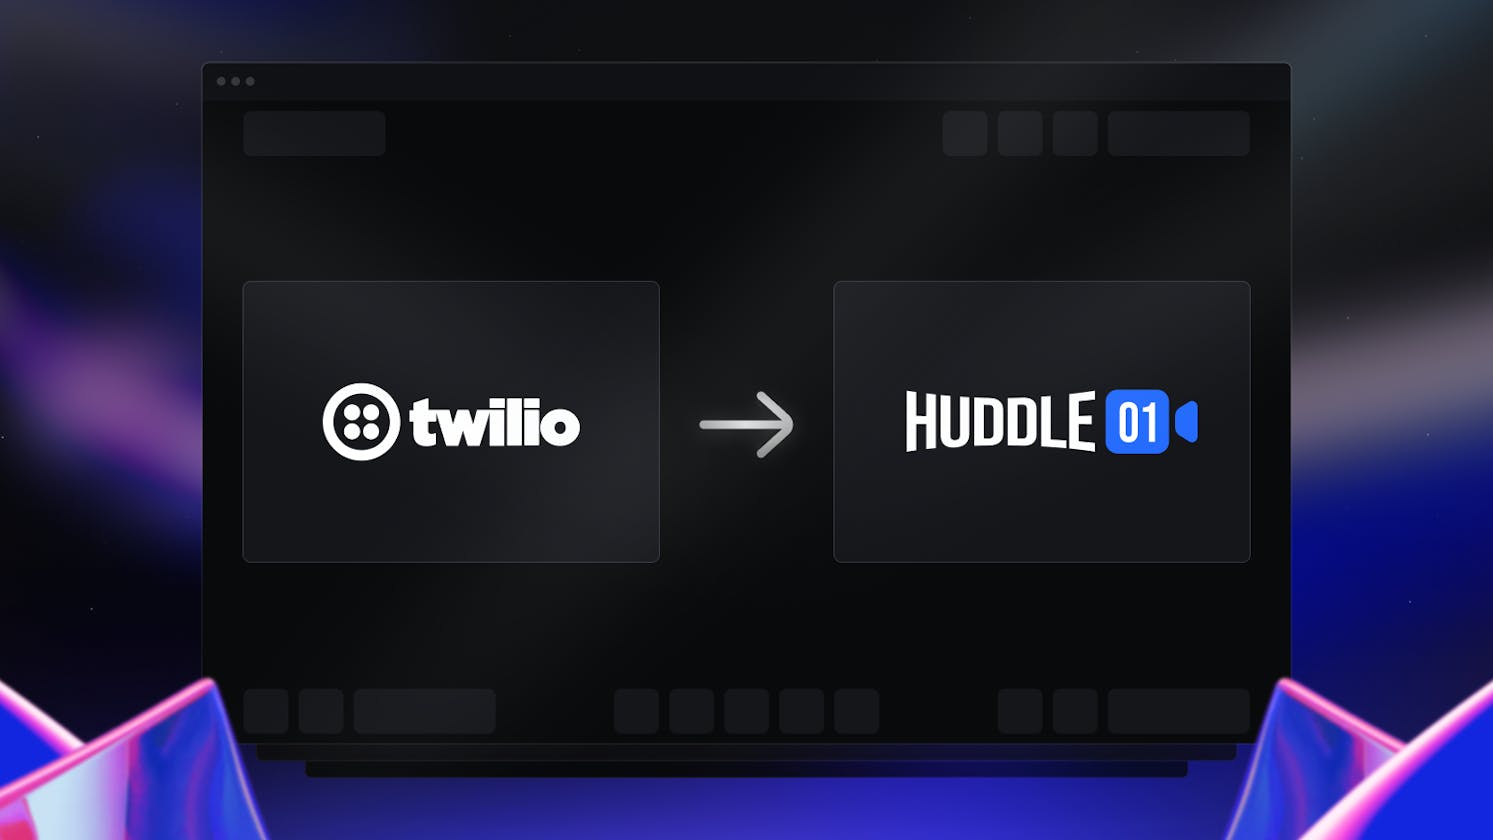 Switch from Twilio to Huddle01 - A Dedicated Real-time Audio/Video Service